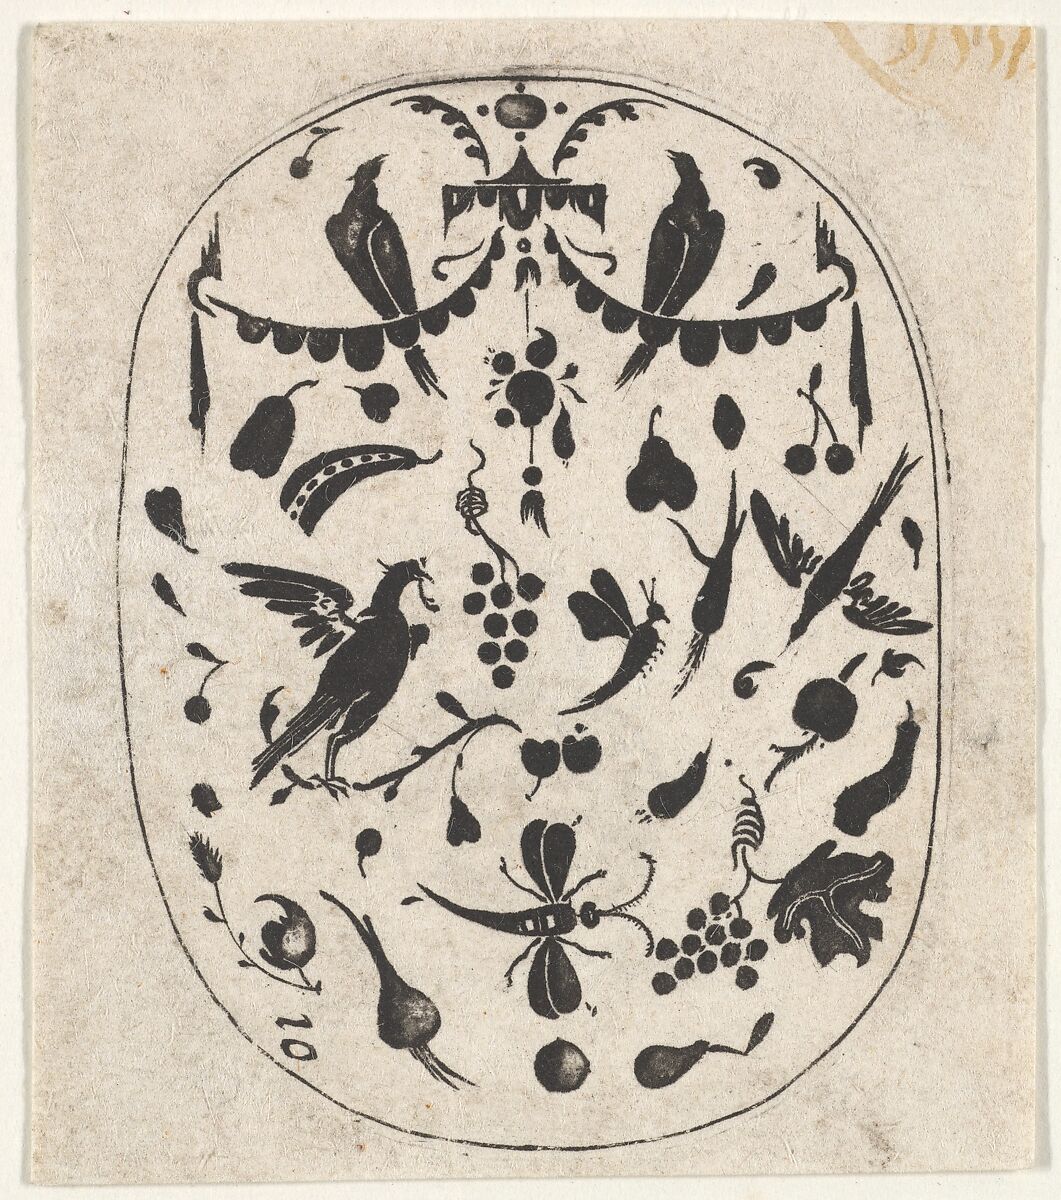 Oval Blackwork Print with Birds, Insects and Fruits